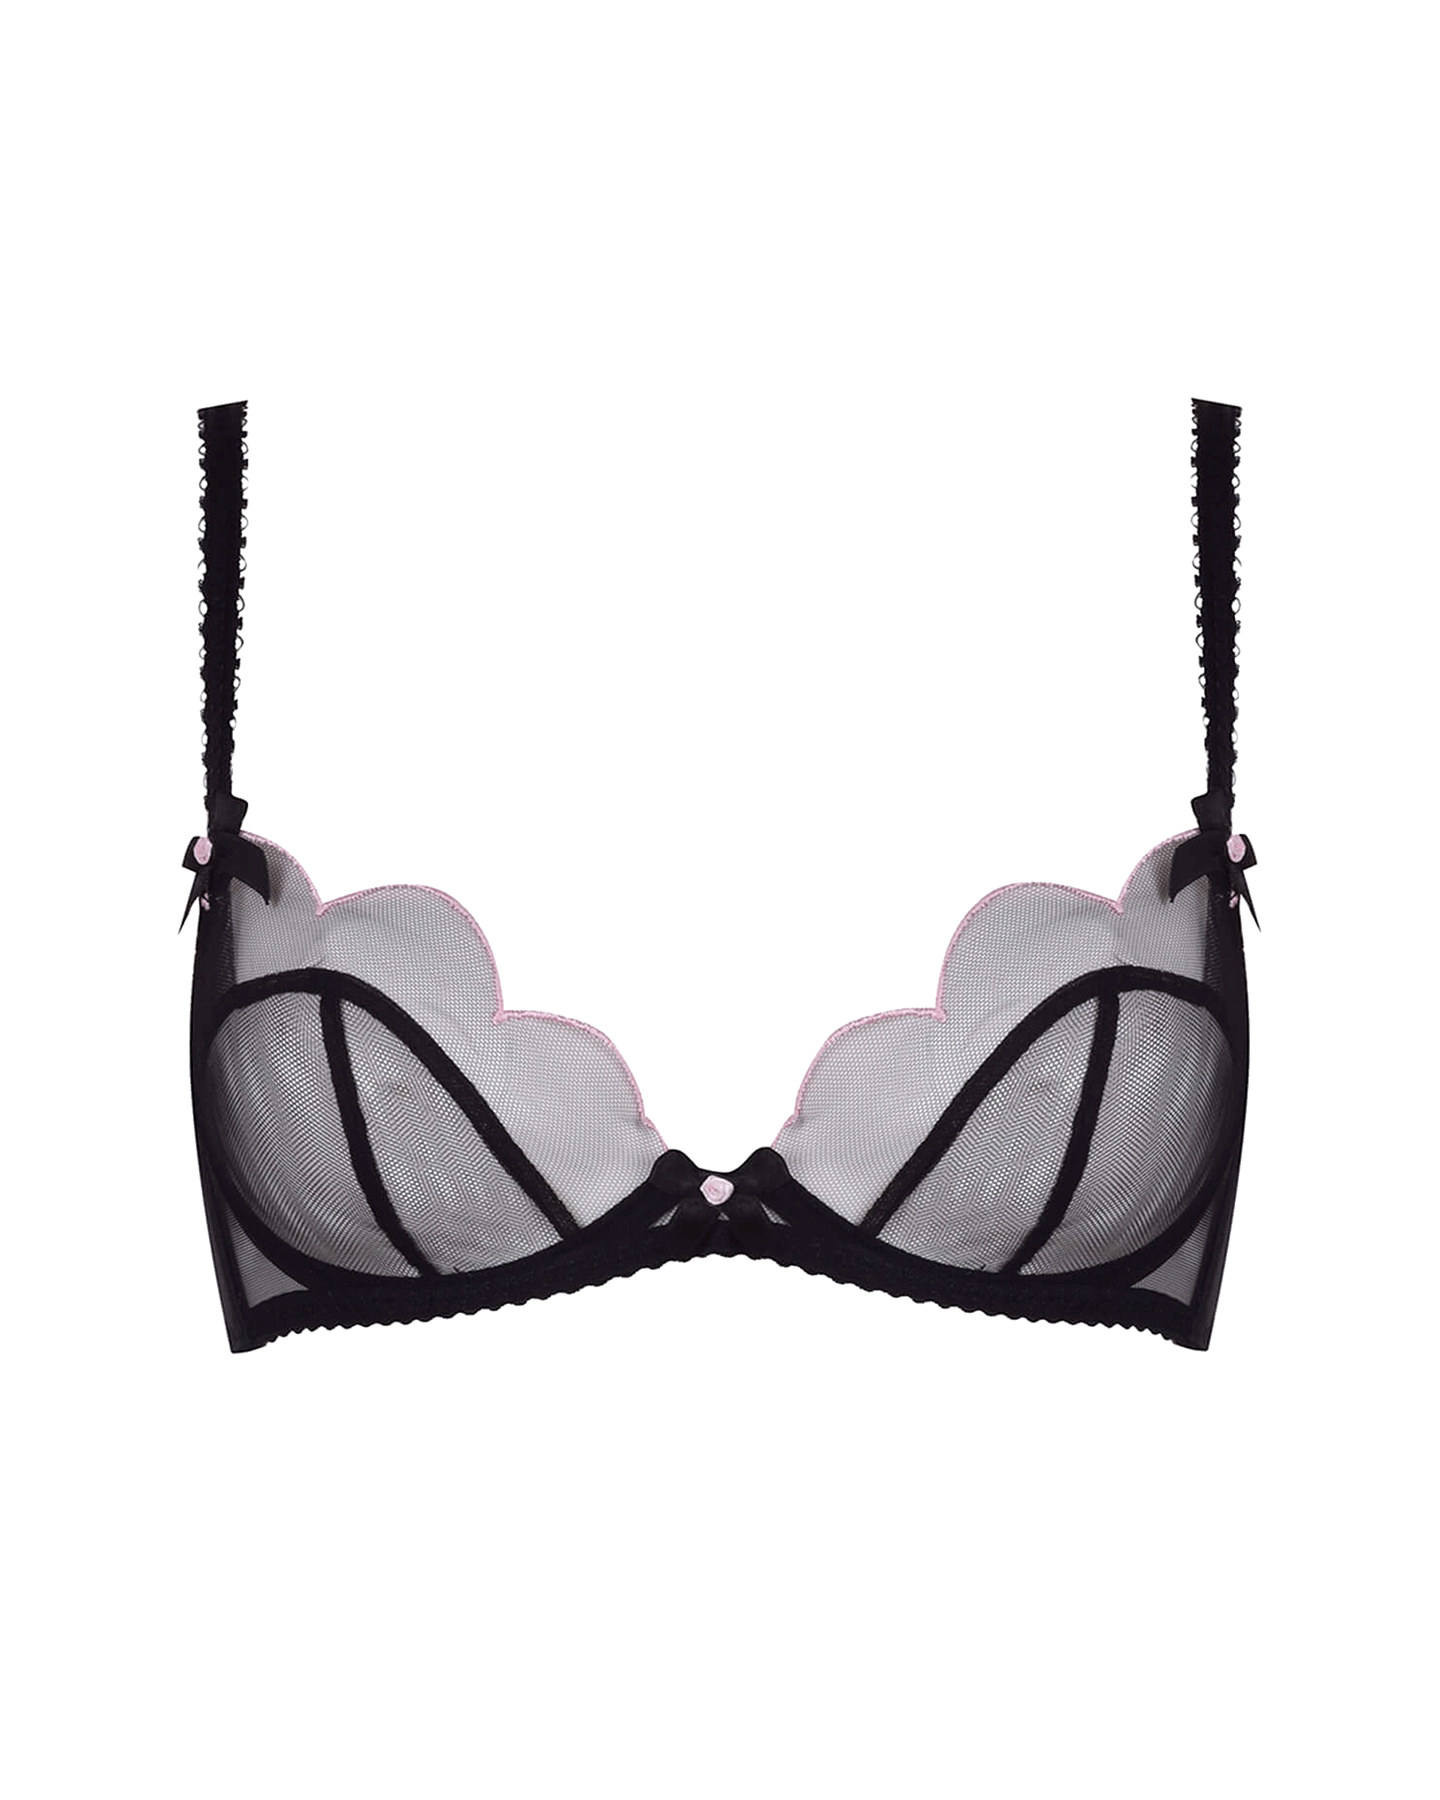 Mercy Corset in Black | Agent Provocateur All Lingerie - Wishupon